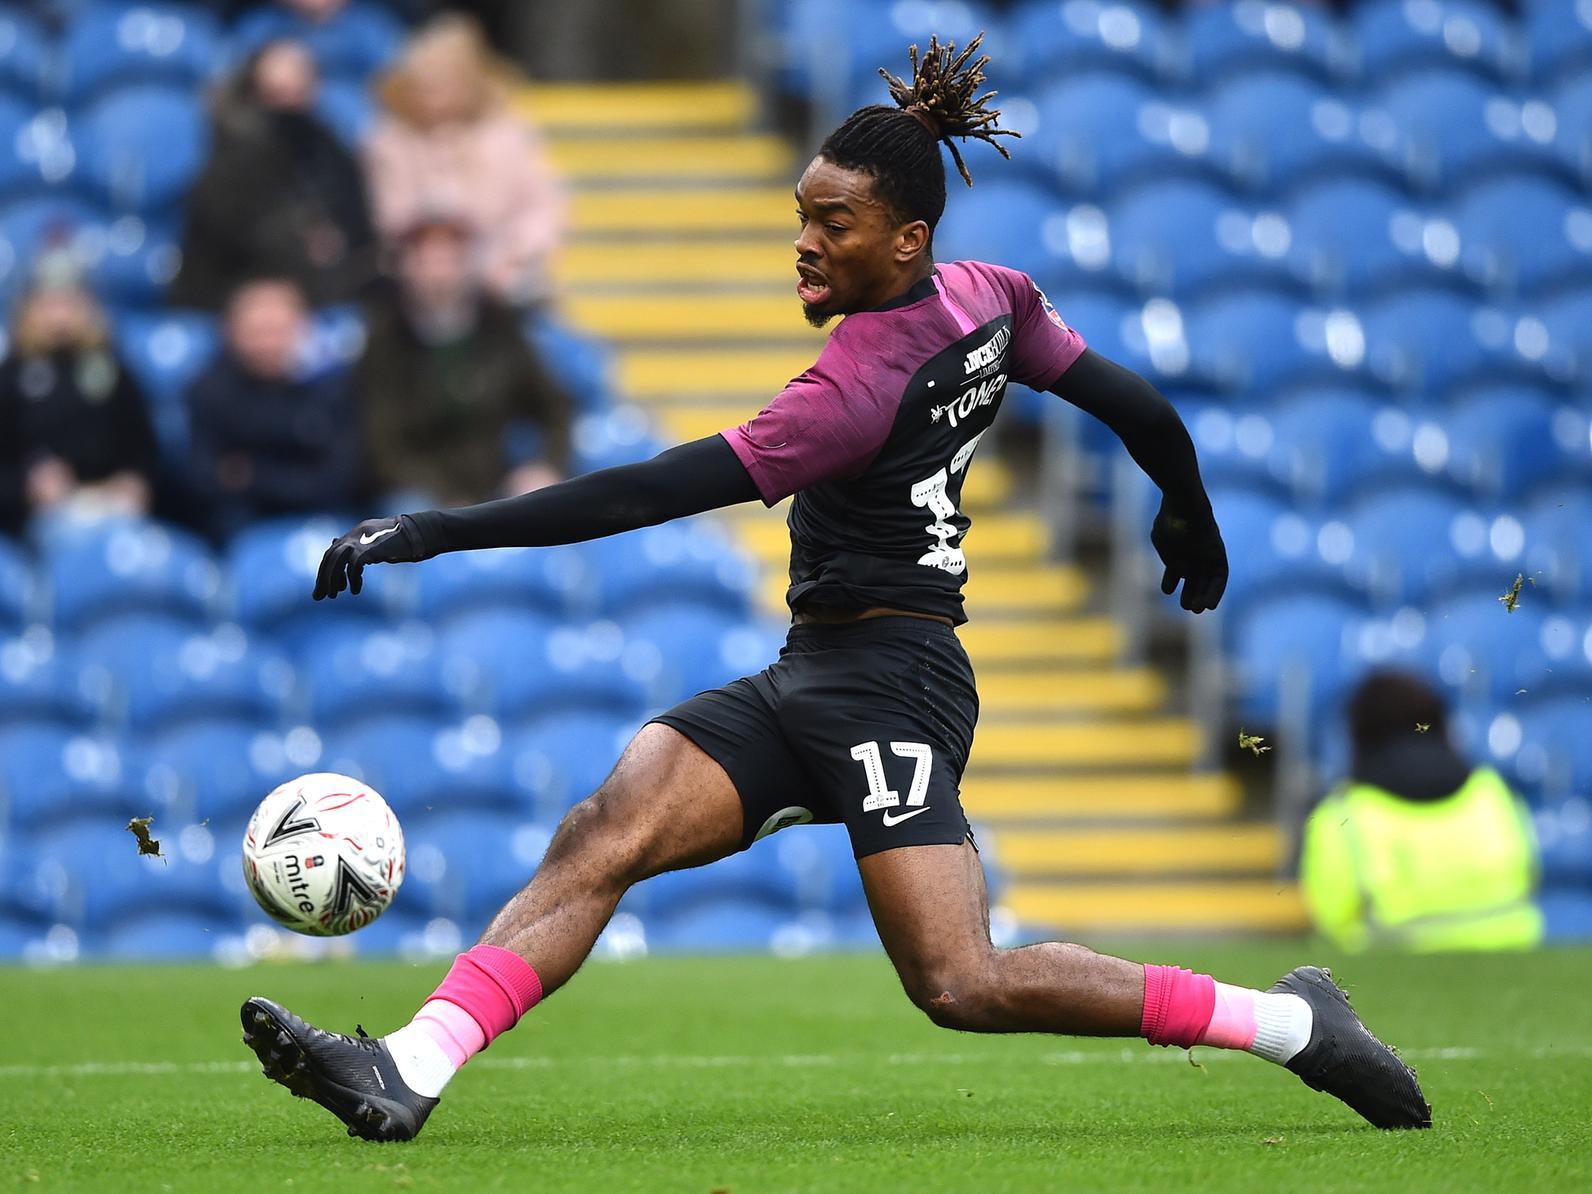 Peterborough United's DOF Barry Fry has revealed that the club have had contact from Brentford over a potential move for Ivan Toney, who has scored 15 League One goals so far this season. (Peterborough Telegraph)